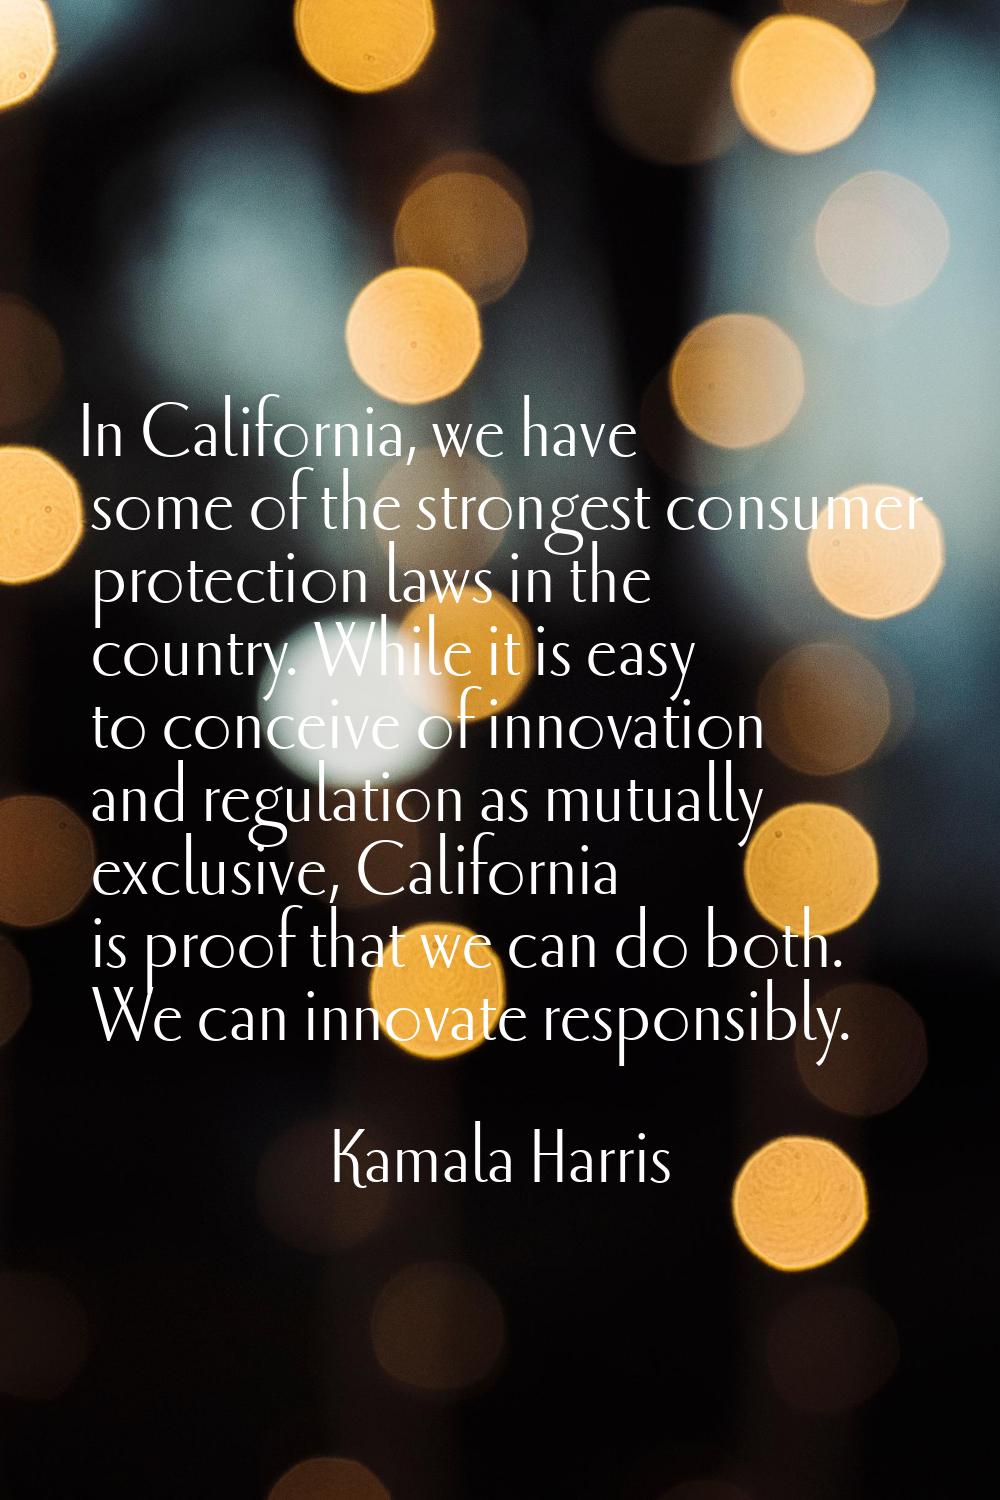 In California, we have some of the strongest consumer protection laws in the country. While it is e